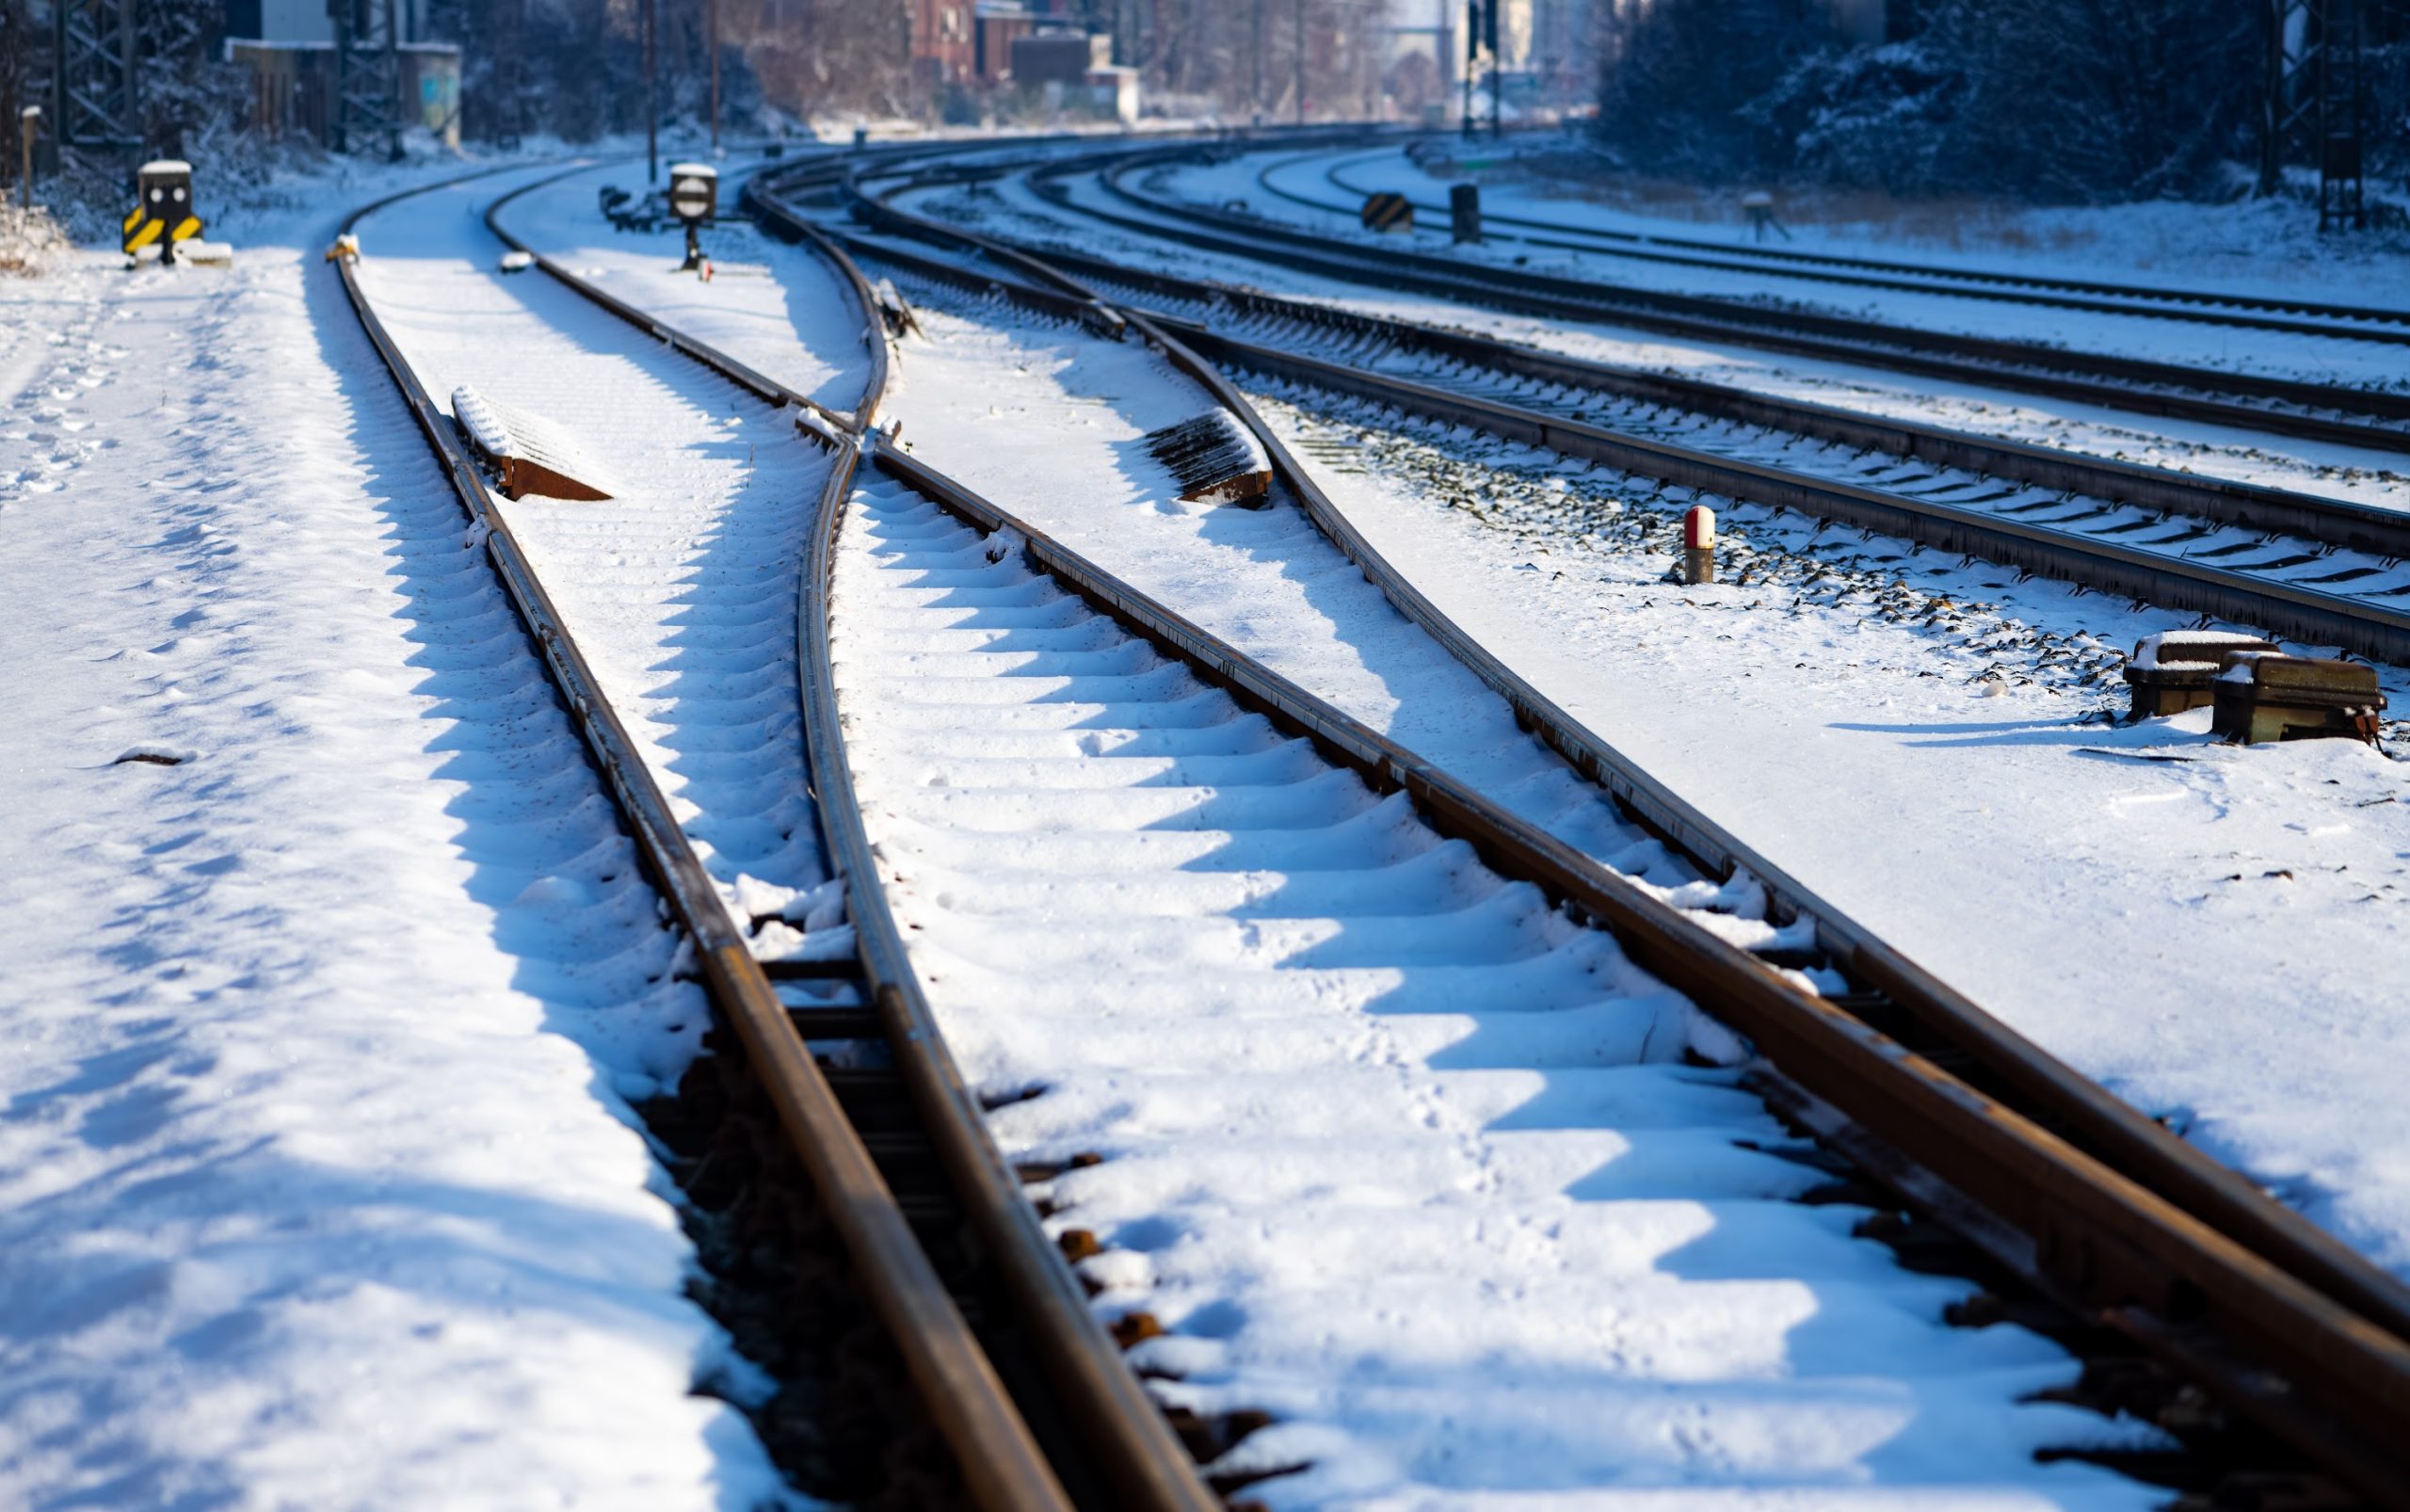 Extreme weather, which must be taken into account when building rail infrastructure, is becoming increasingly common globally (Photo: Shutterstock)